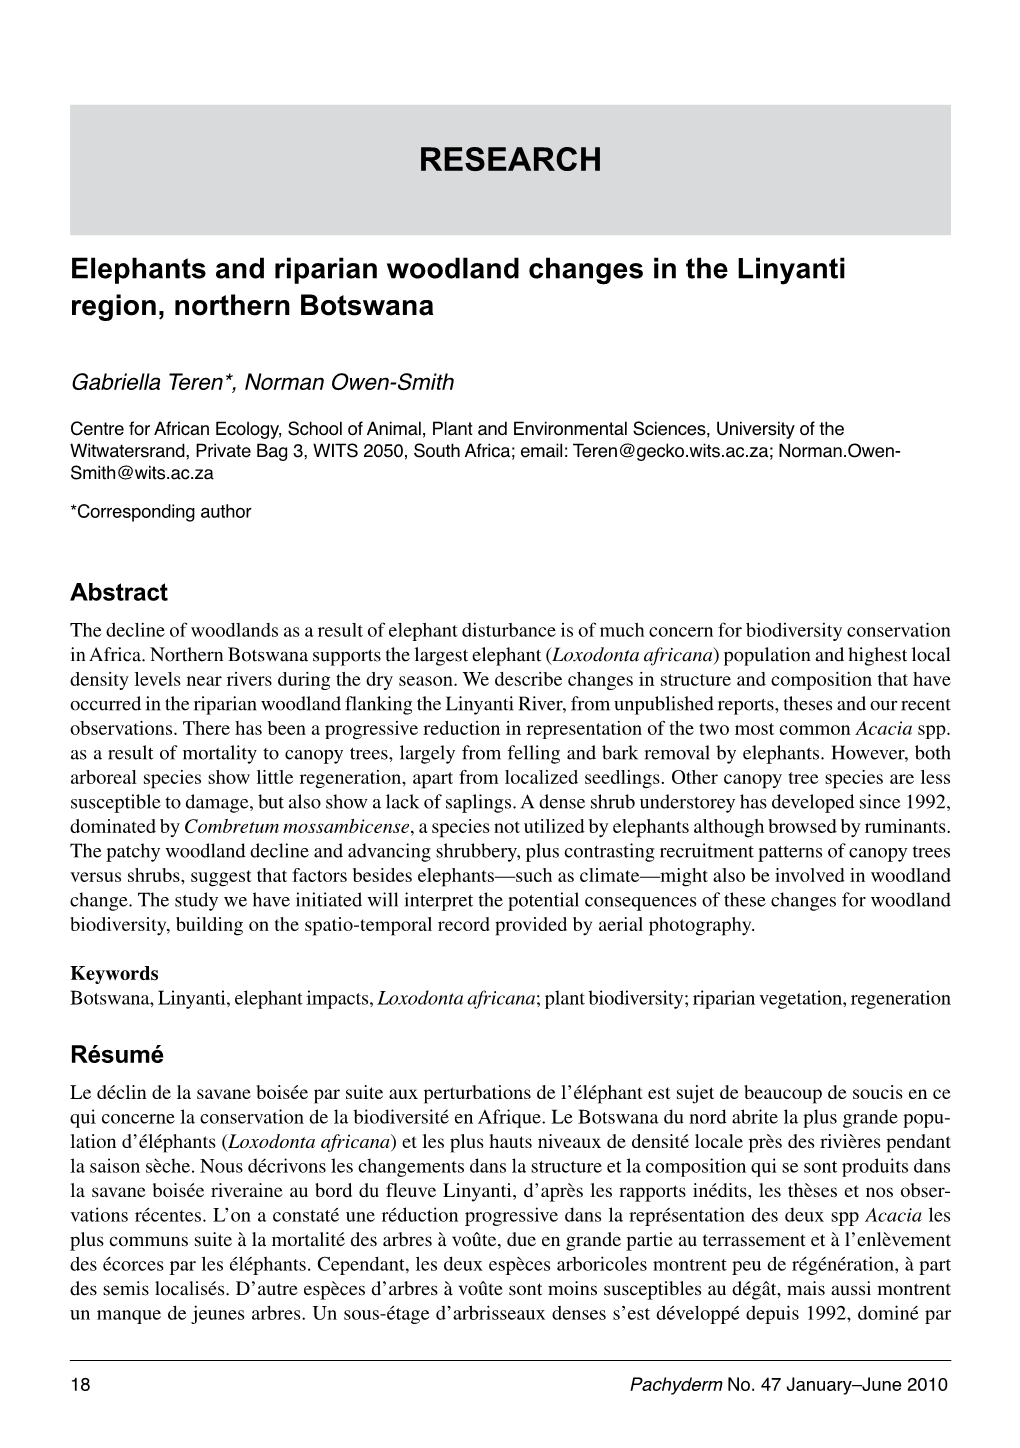 Elephants and Riparian Woodland Changes in the Linyanti Region, Northern Botswana